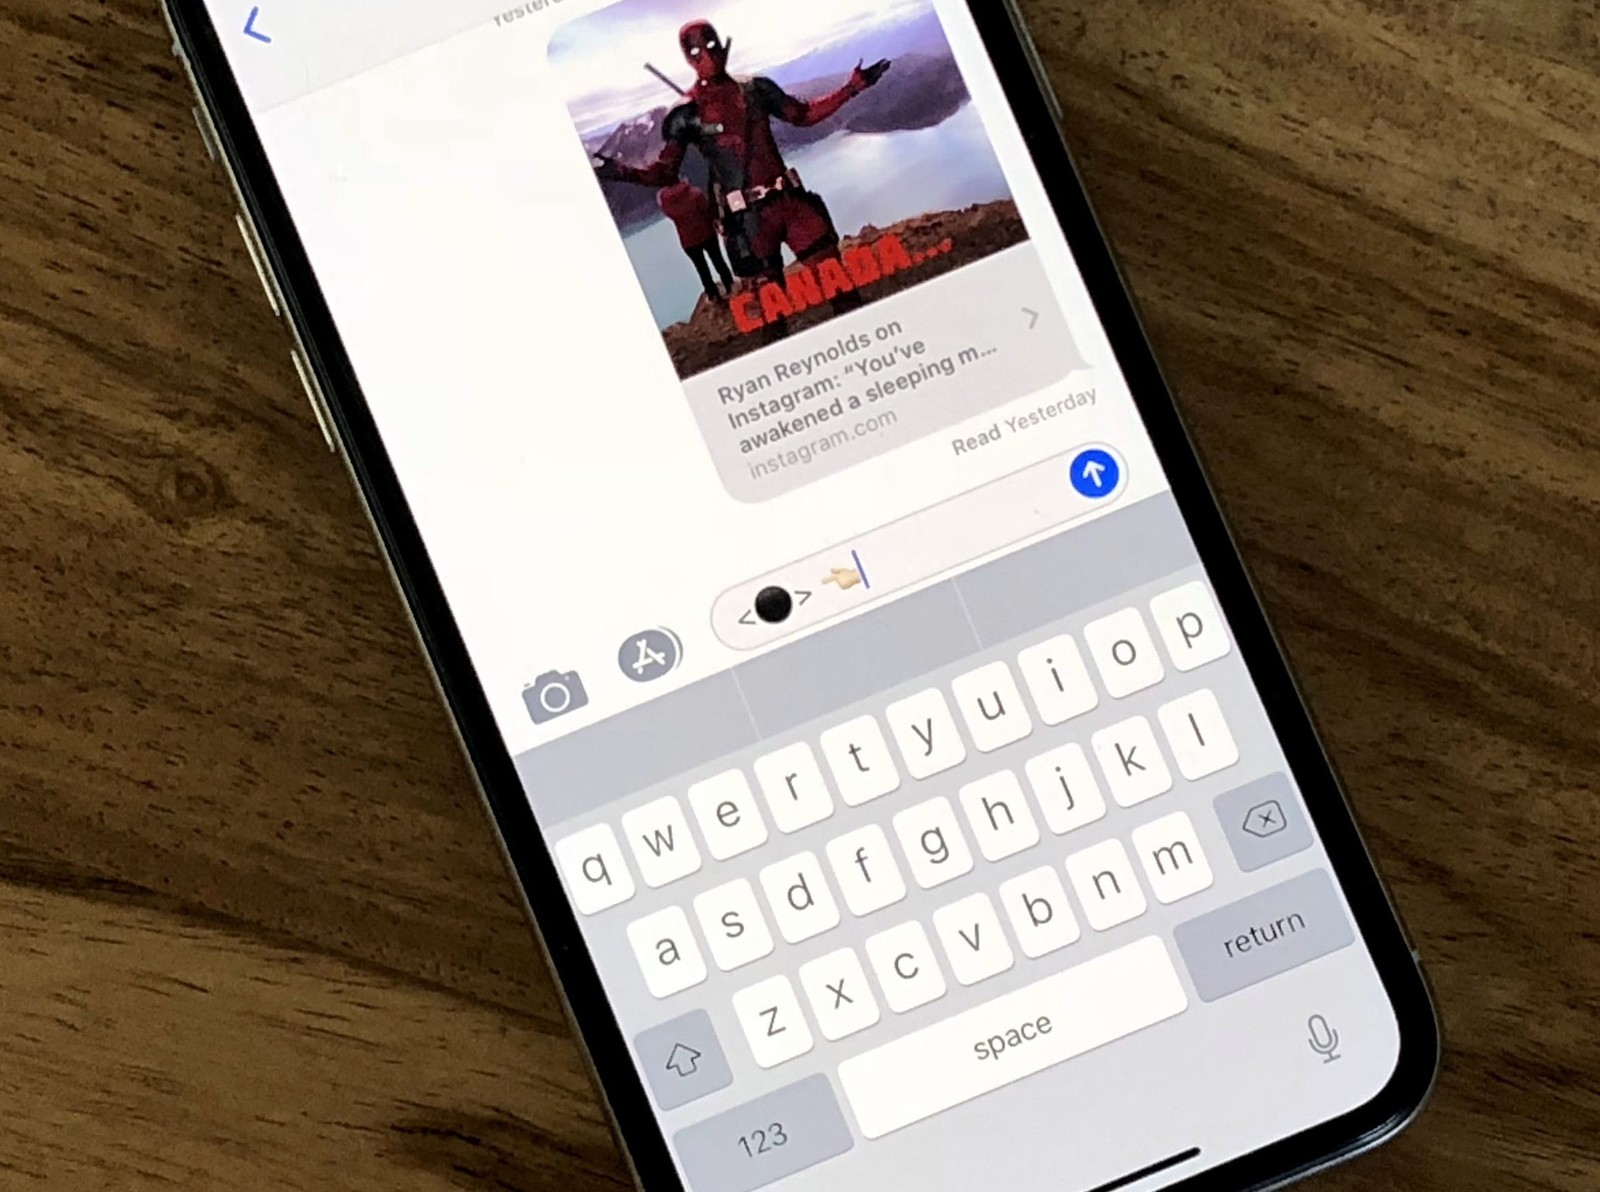 New string locks the Messages app on the iPhone; know how to solve